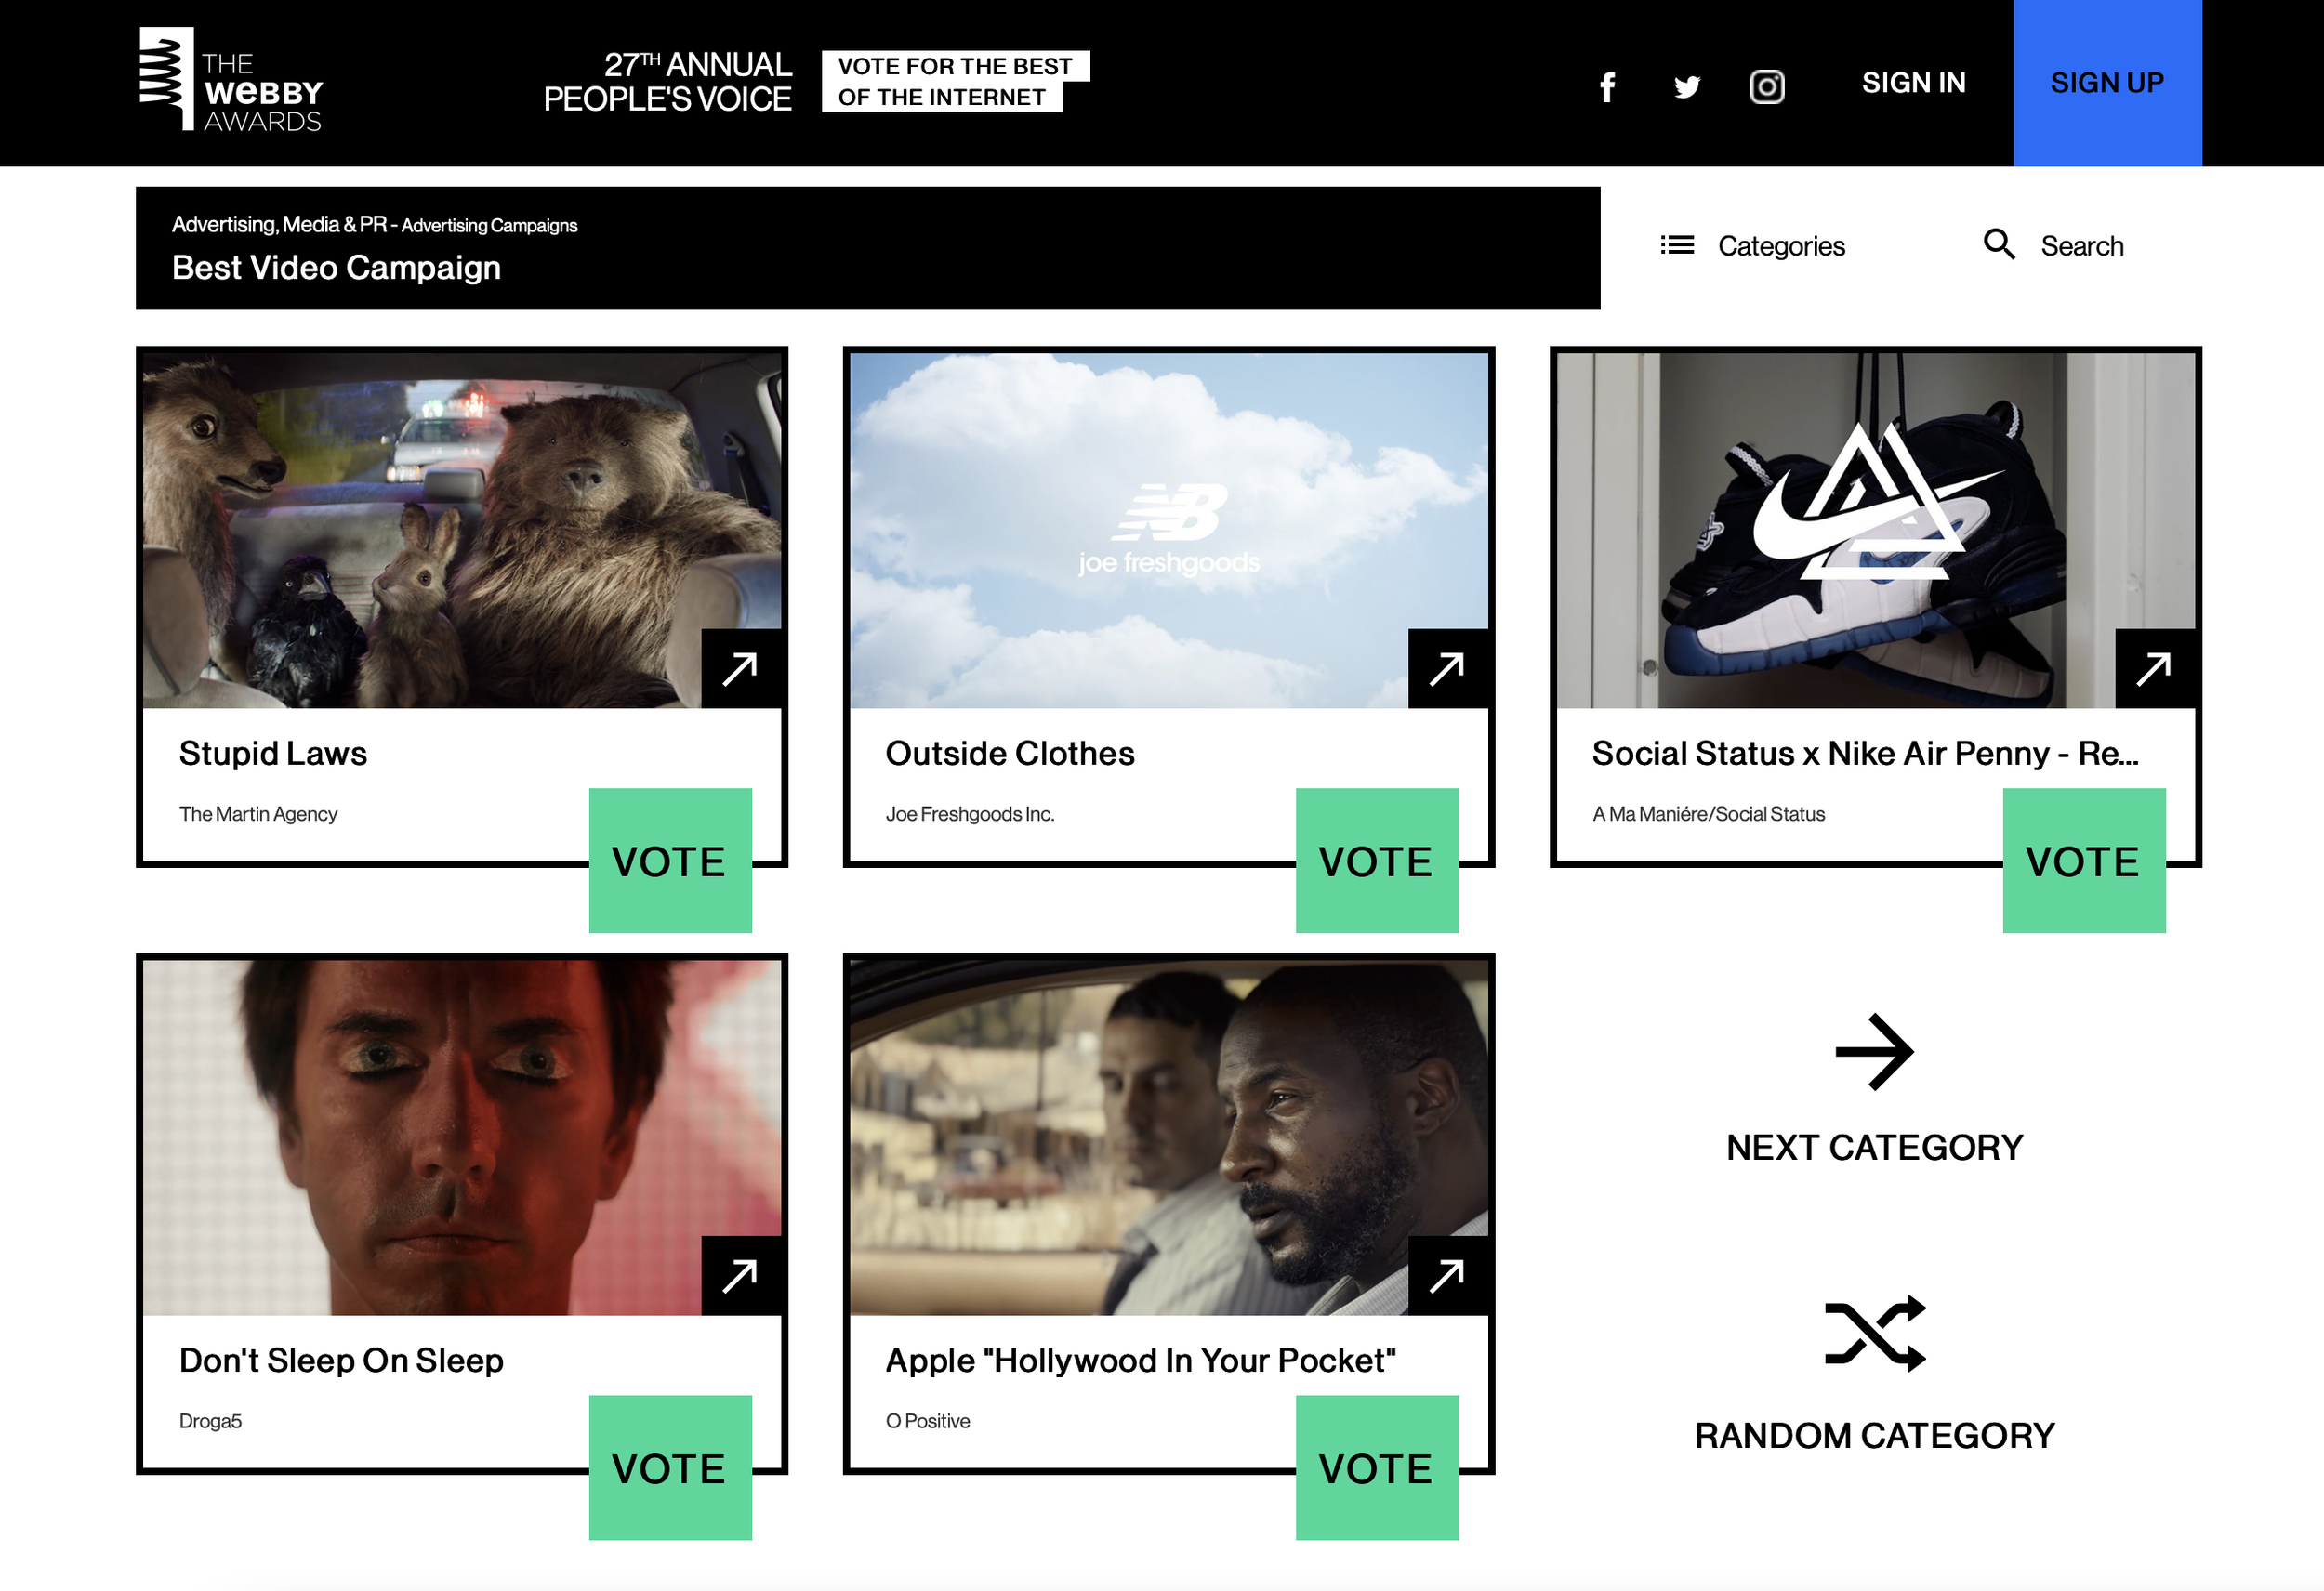 LegalShield nominated for best Video Campaign at the Webby's